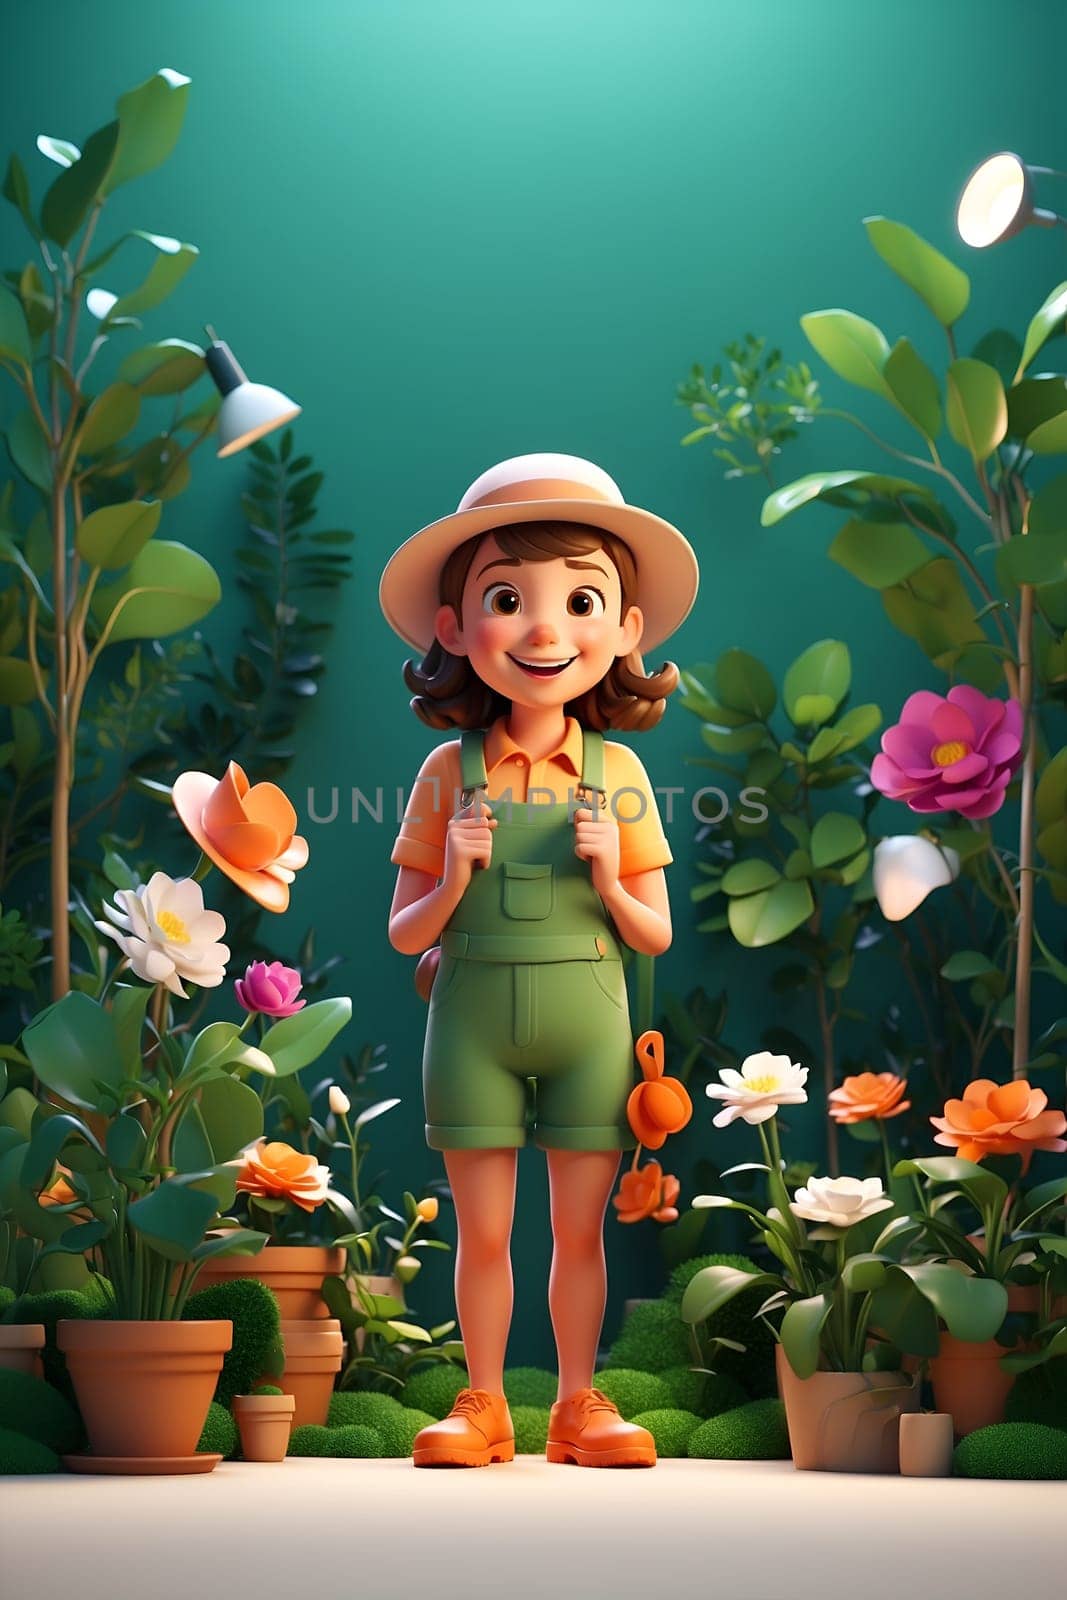 A woman wearing overalls and a hat poses confidently in front of a collection of potted plants.